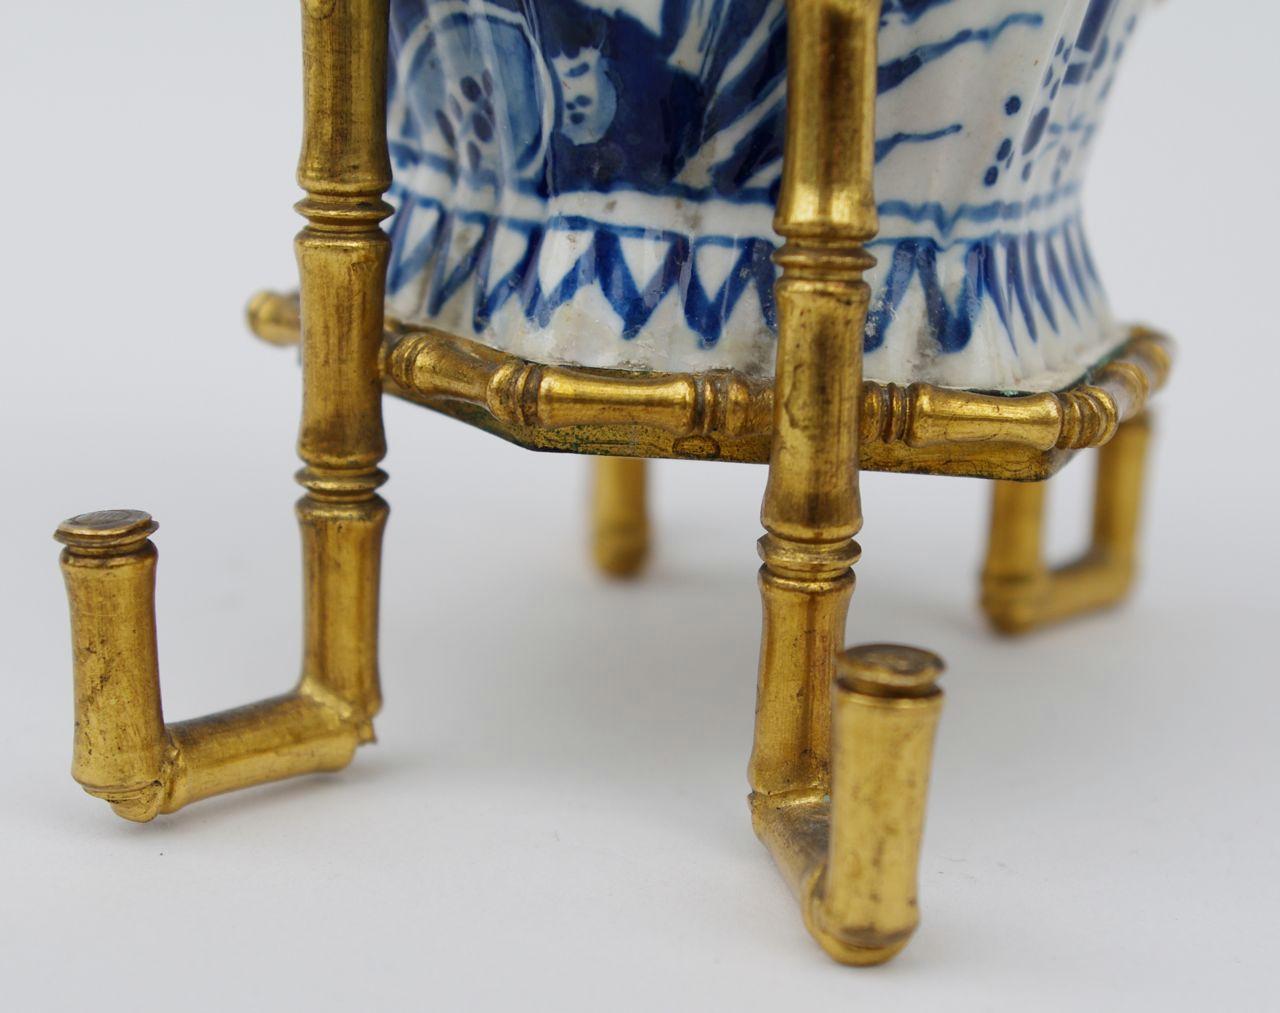 European Delftware Small Vase Mounted in Gilt Bronze, Late 19th Century